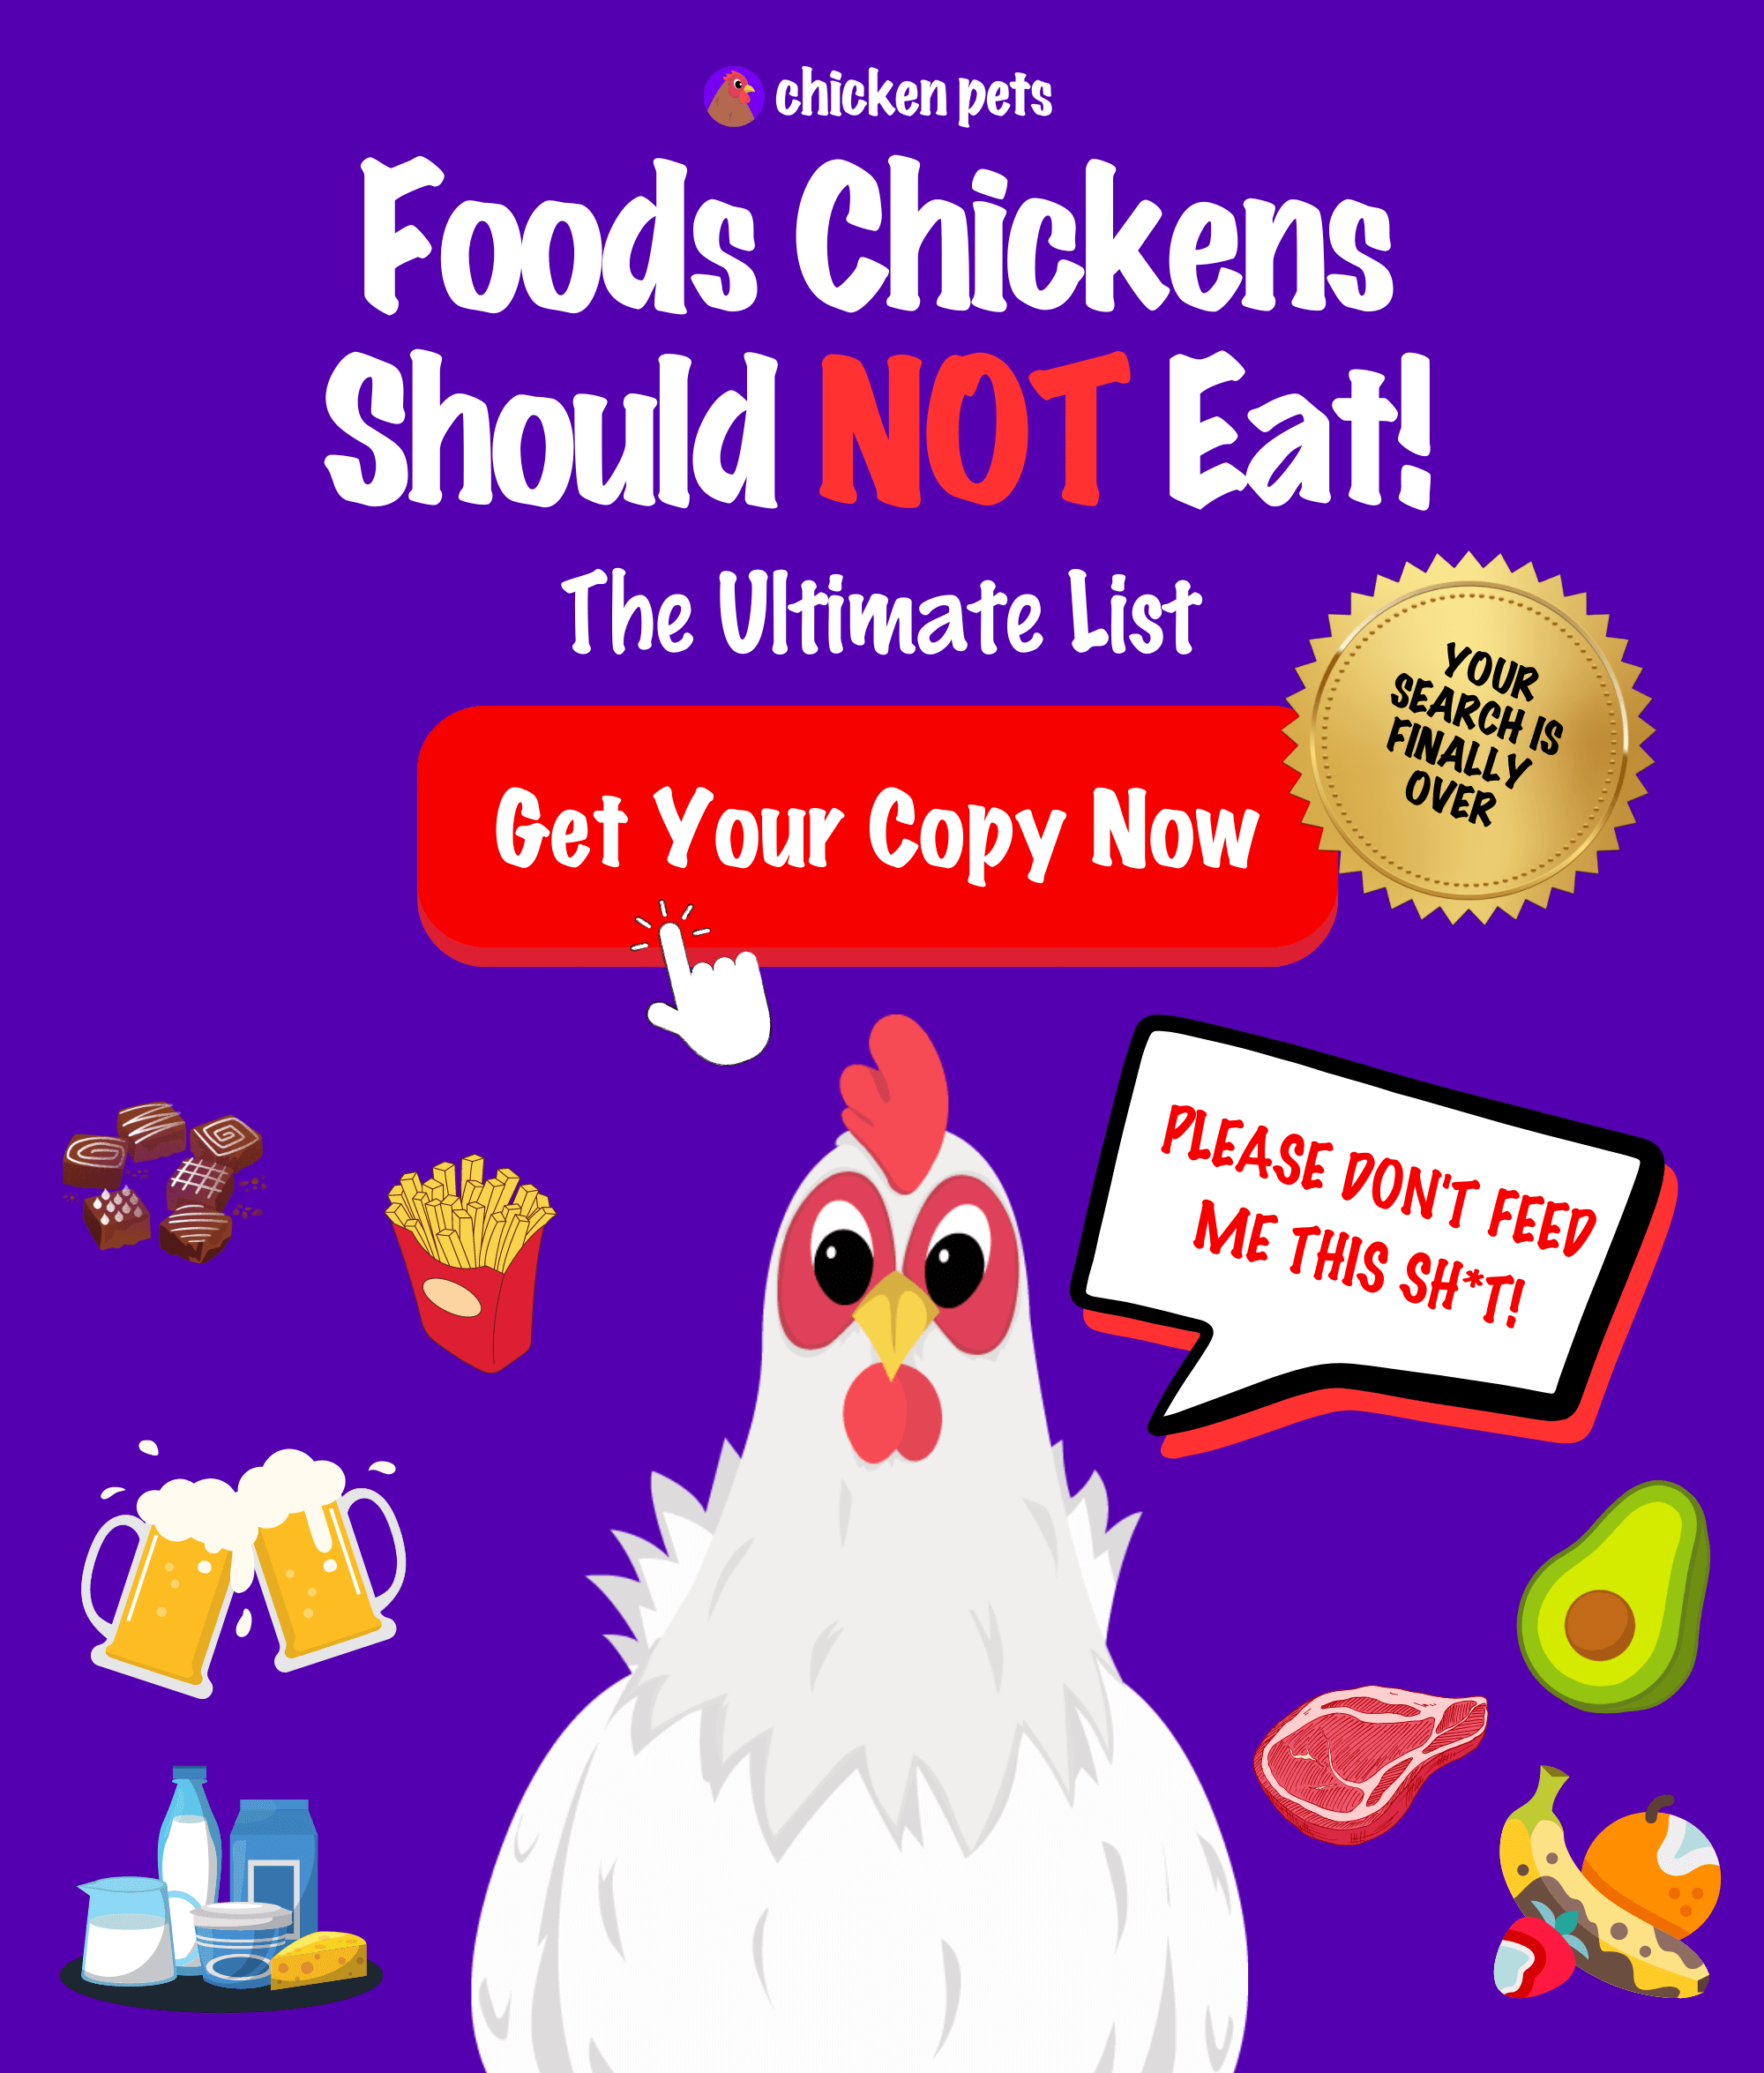 Foods Chickens Should NOT Eat. The Ultimate List.